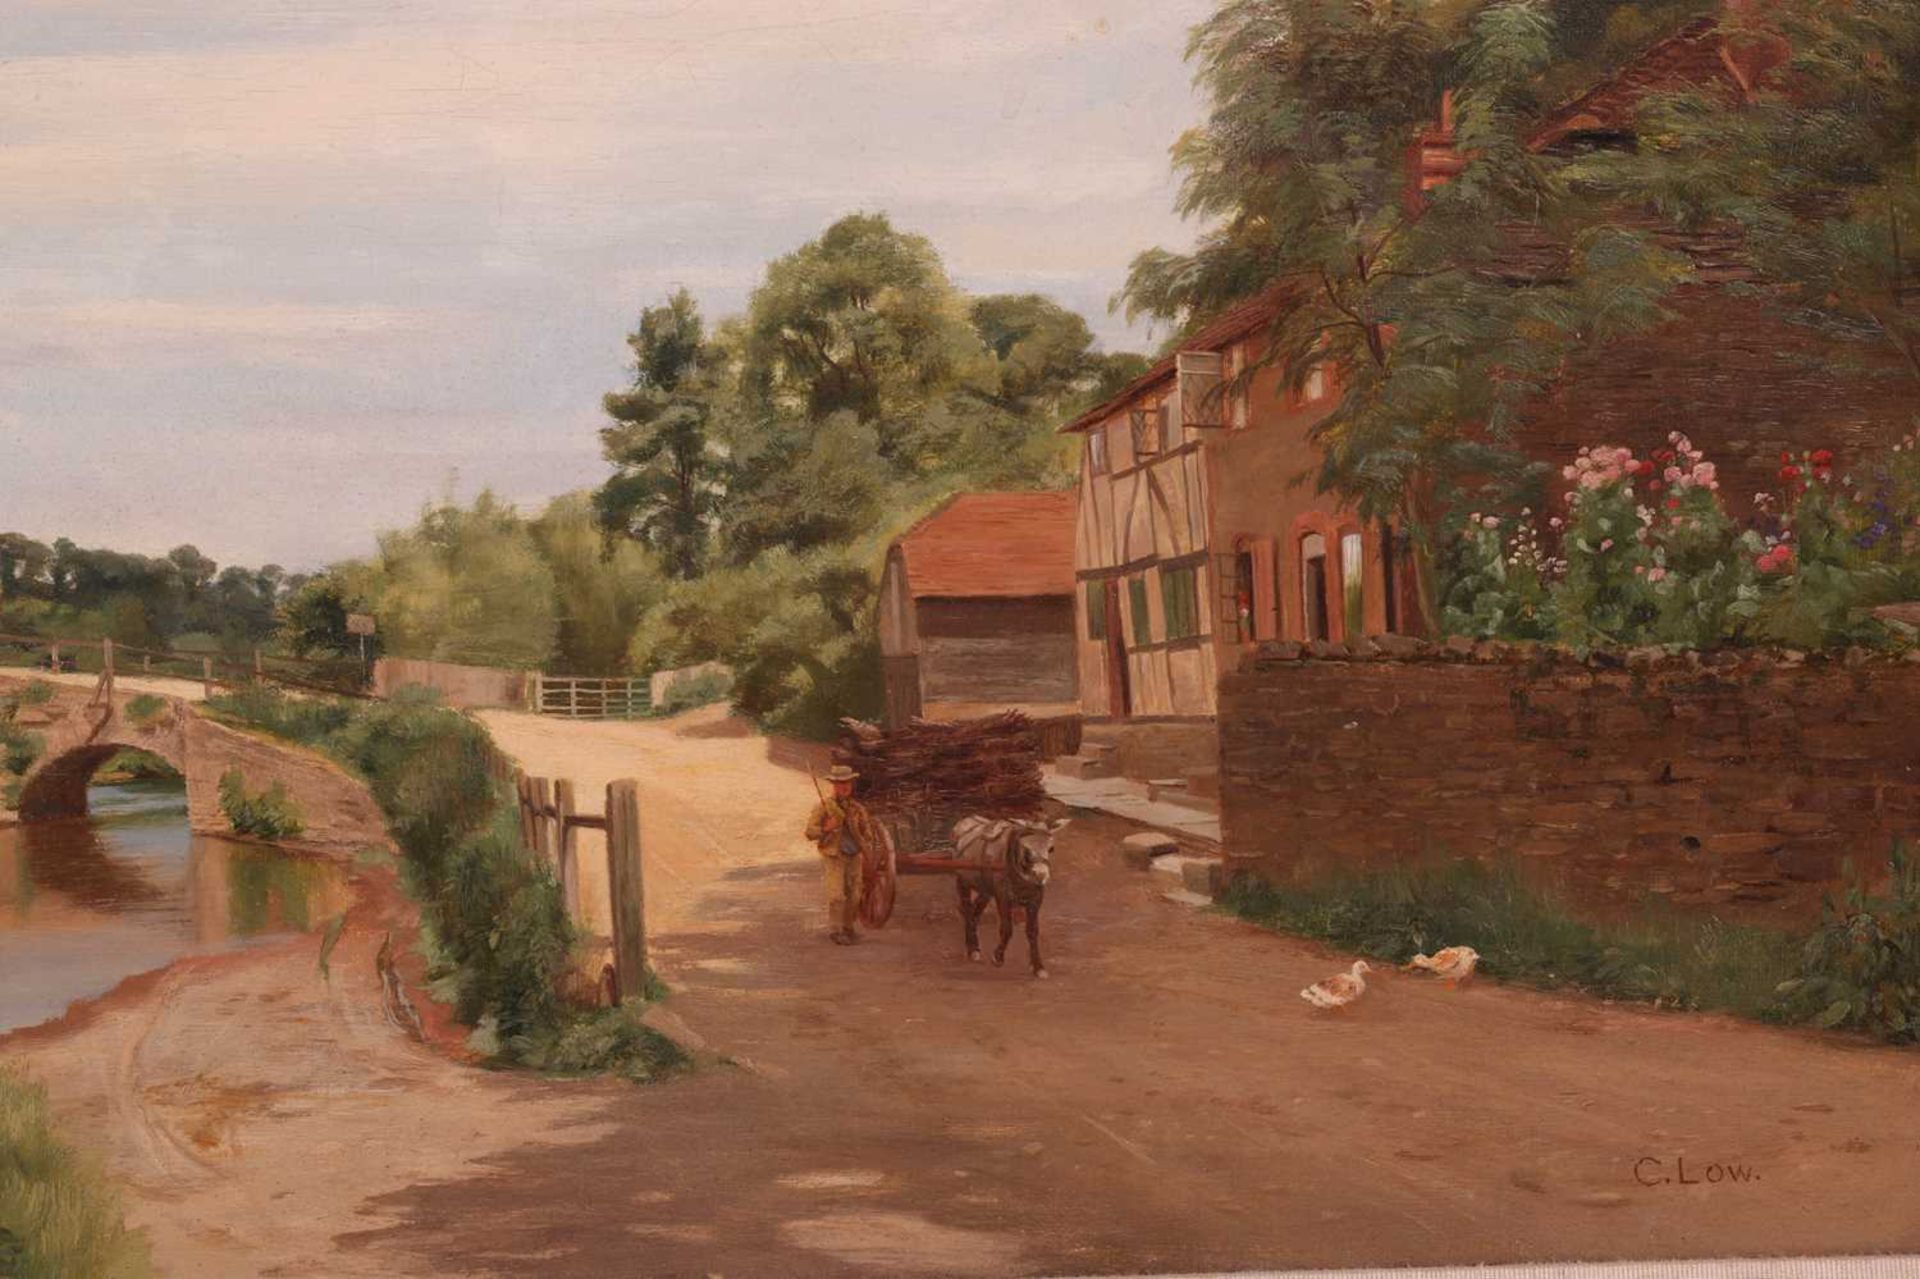 Charles Low (1840 - 1906), The Village Ford, Eashing, Surrey, signed, oil on canvas, 32.5 x 49 cm, f - Image 3 of 8